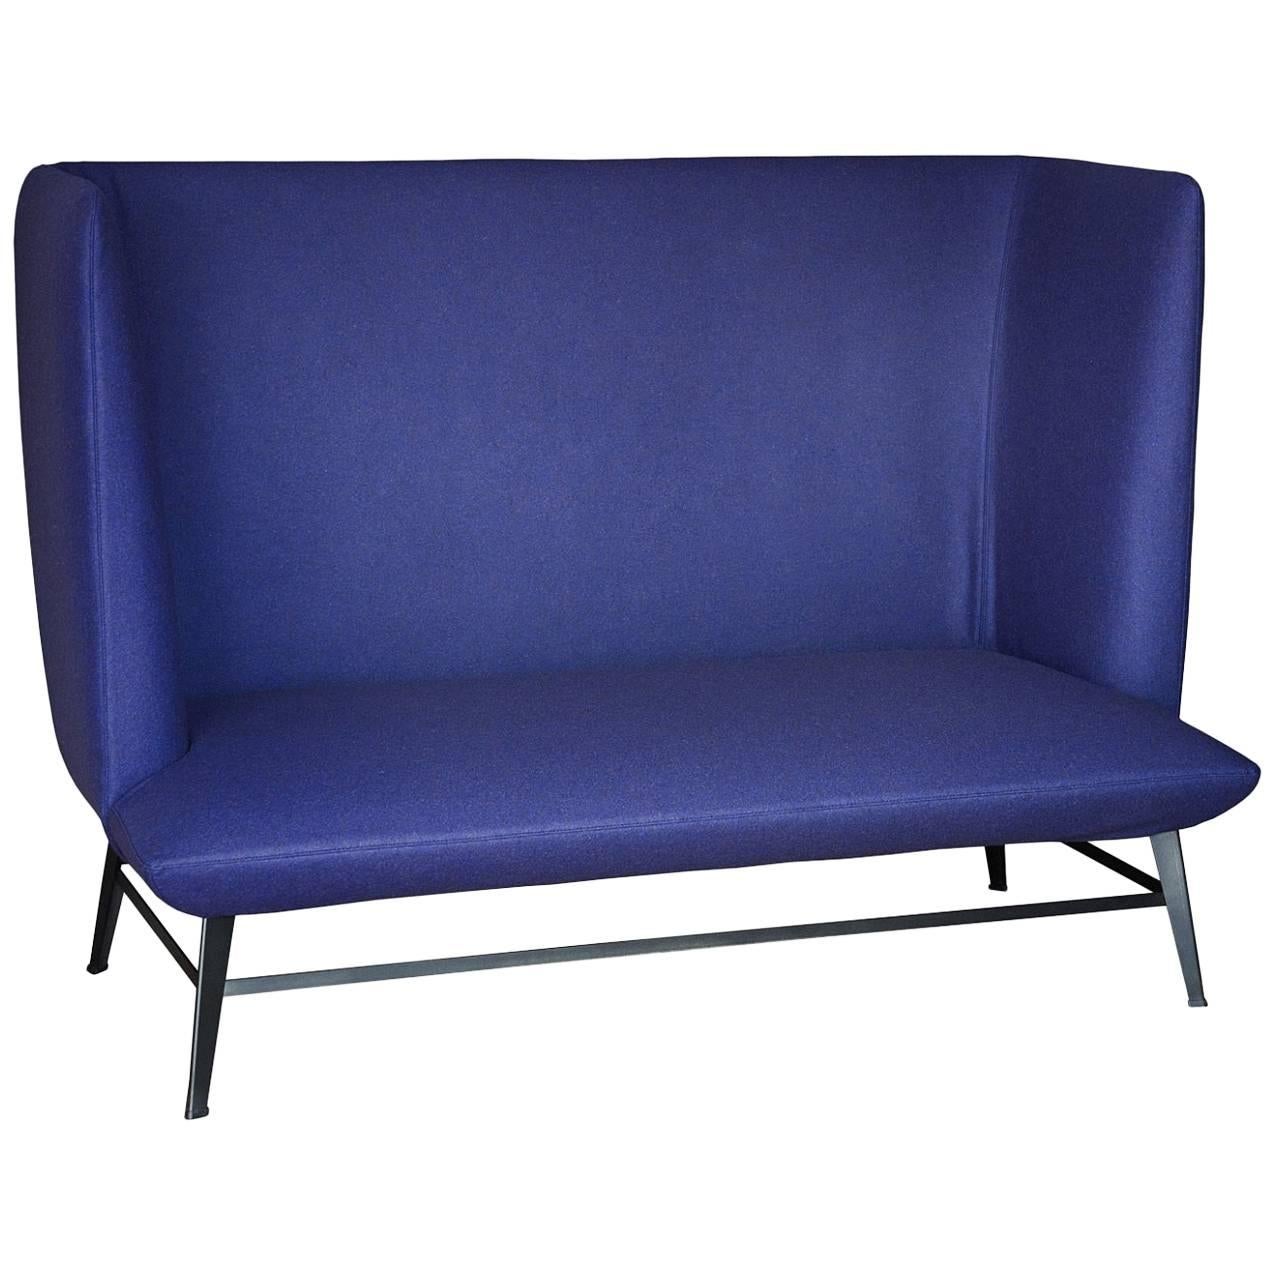 "Gimme Shelter" Two-Seat Sofa with Steel Frame and Base by Moroso for Diesel